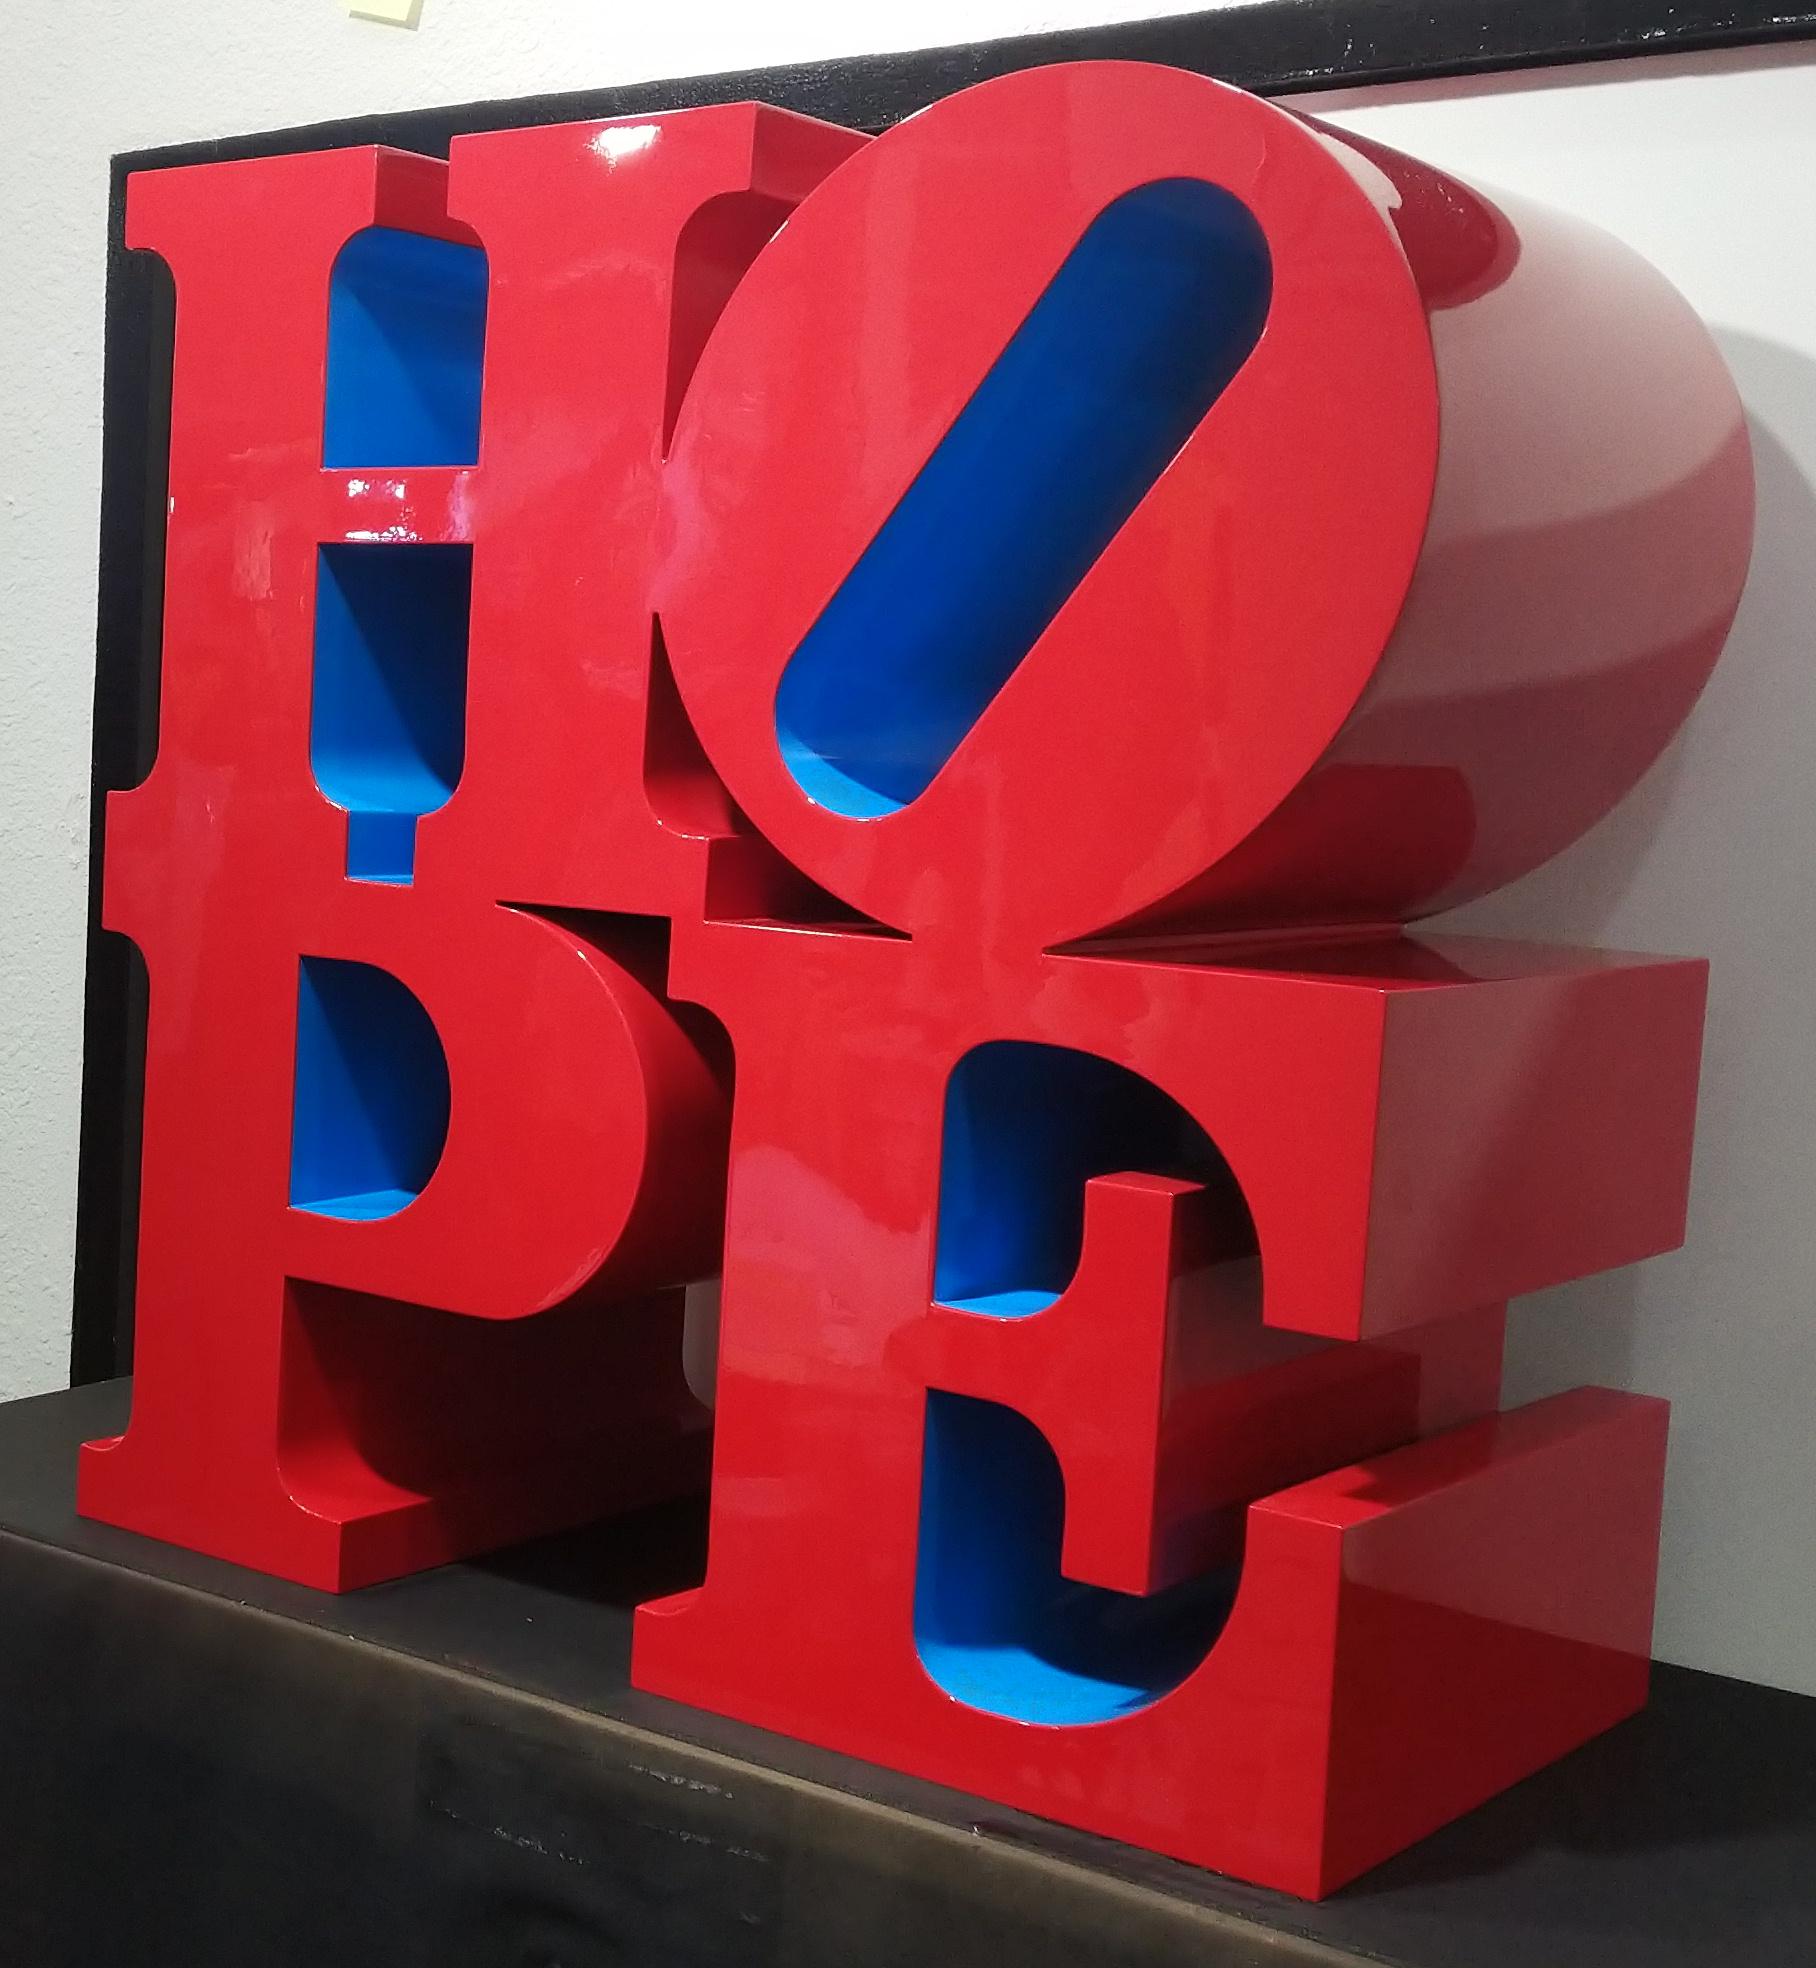 robert indiana hope red/blue